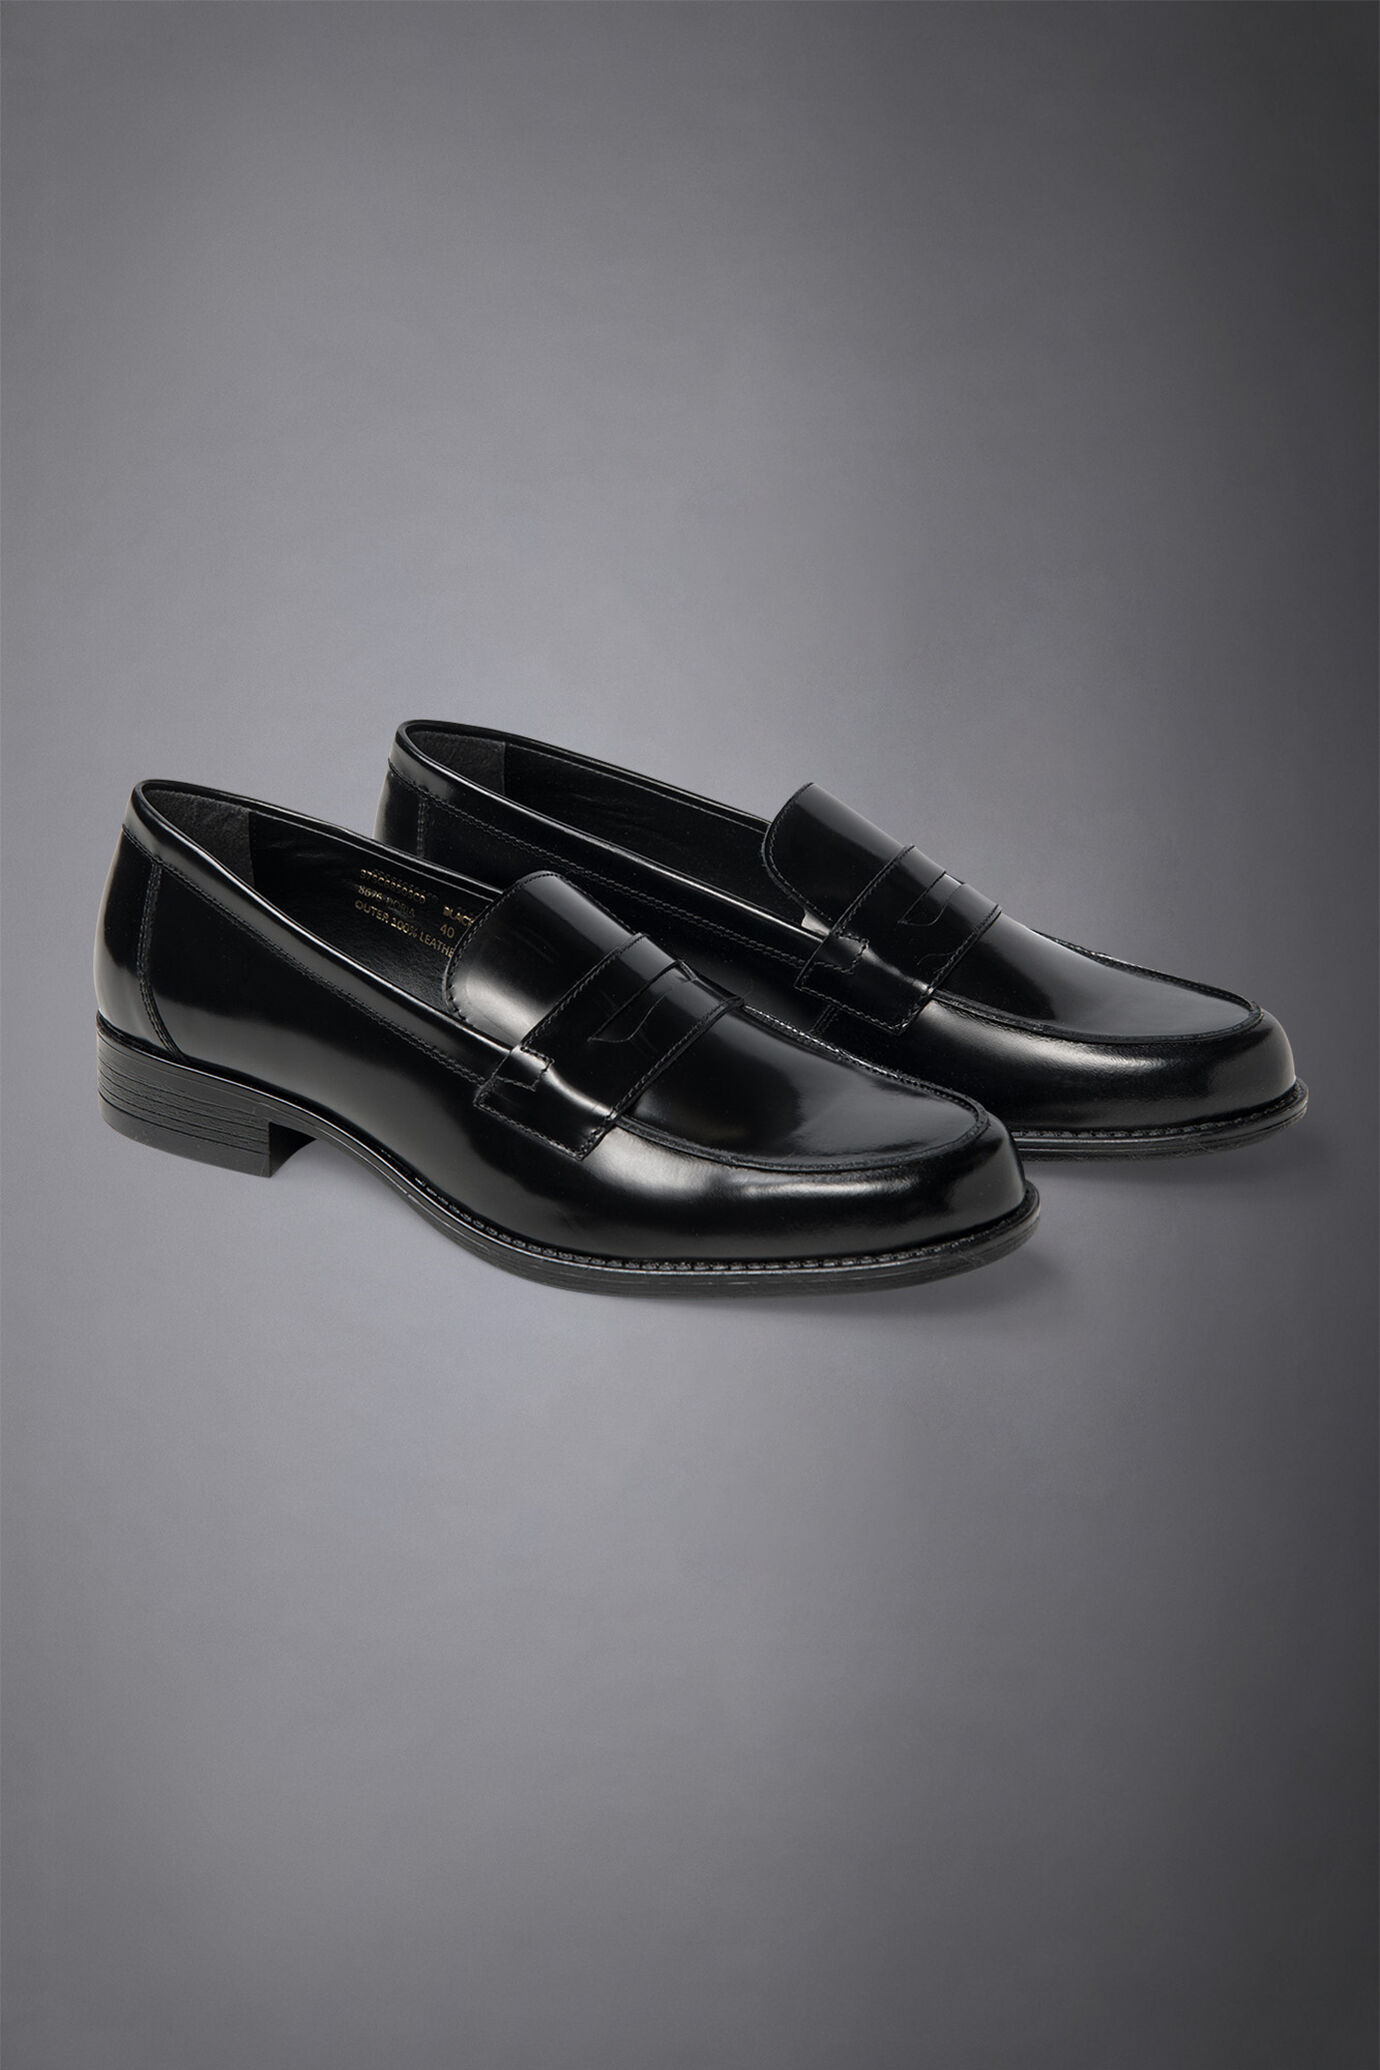 100% leather classic loafer with rubber sole